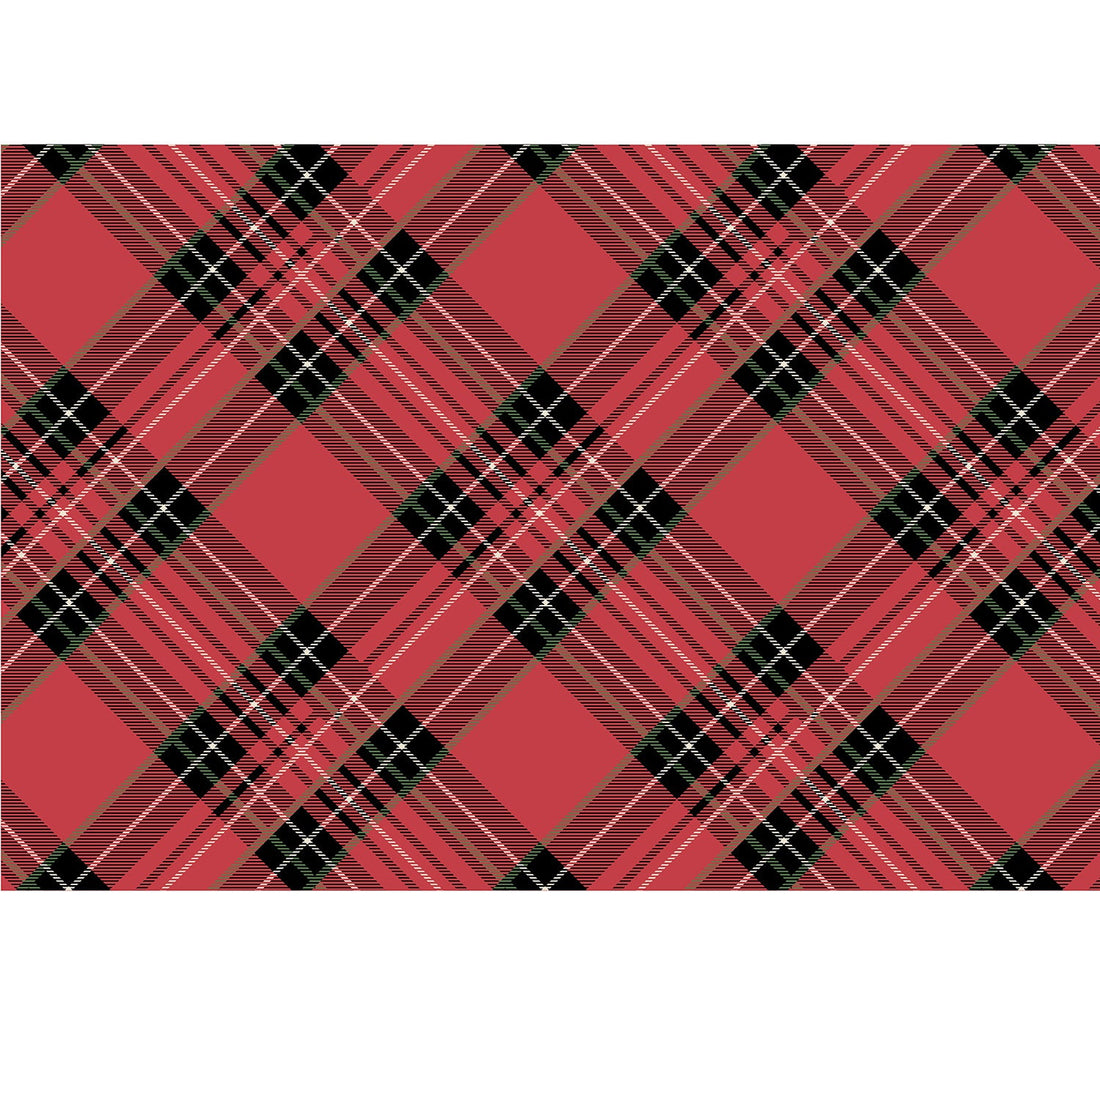 A MISPRINT Red Plaid Placemat in a red plaid fabric with black and white squares, perfect for bringing the Christmas spirit to any holiday table. (Brand: Hester &amp; Cook)